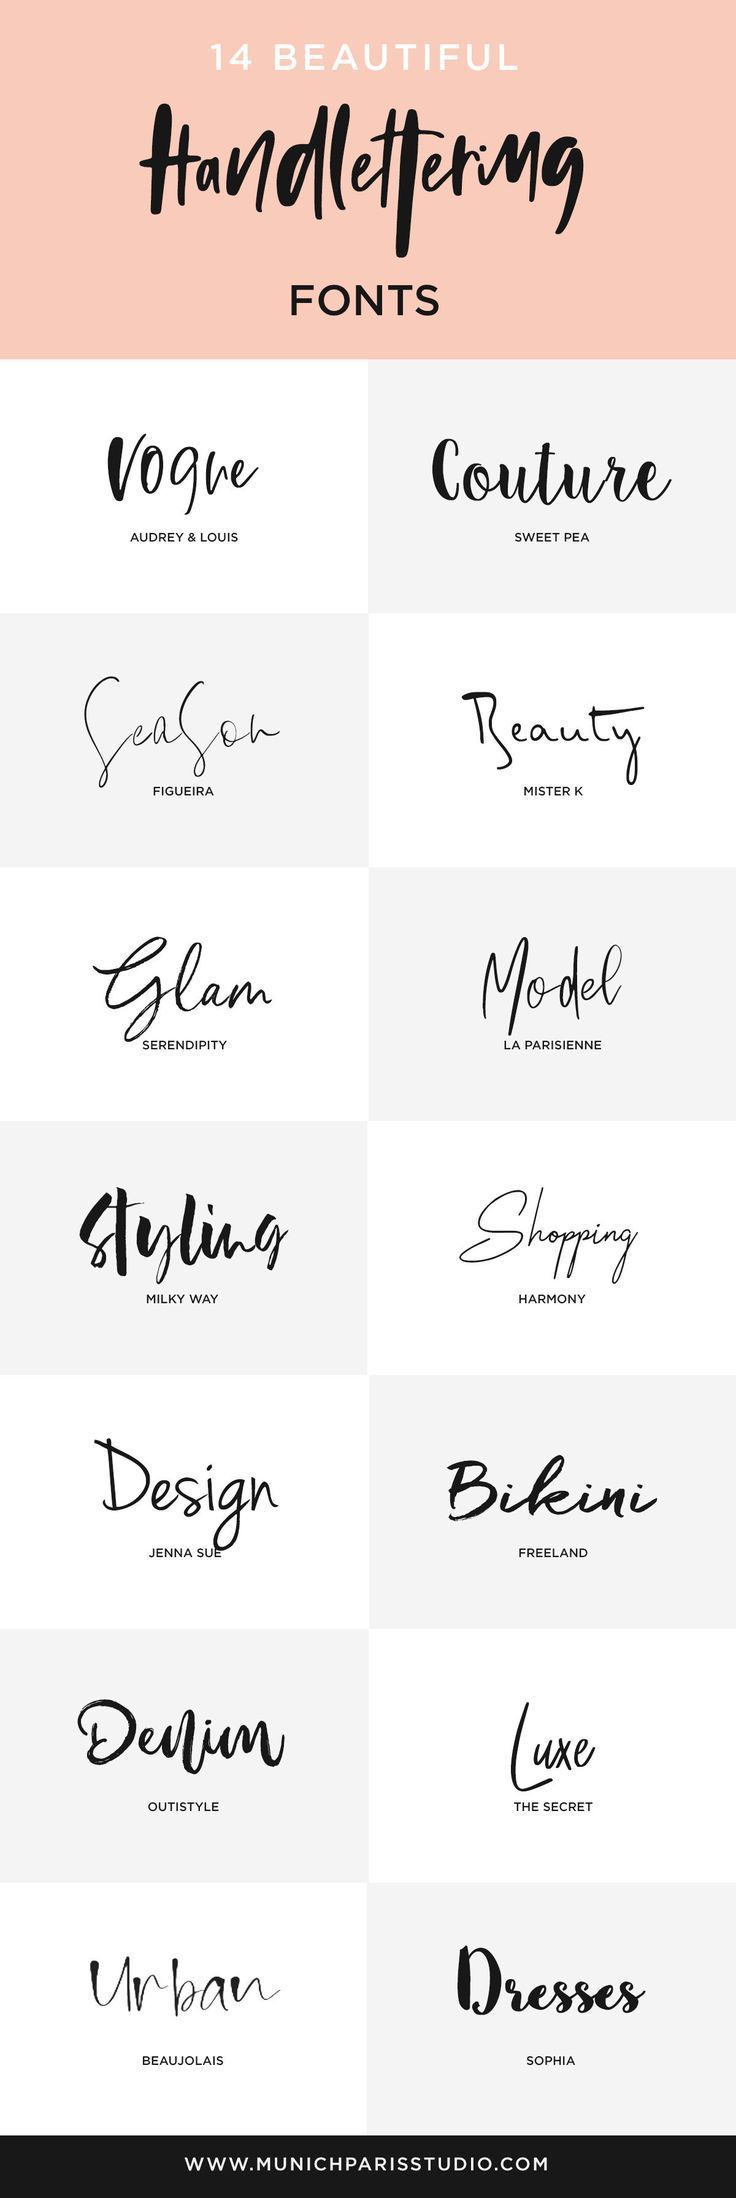 14 Beautiful Hand-Lettered Fonts for Logo & Branding | MunichParis Studio - 14 Beautiful Hand-Lettered Fonts for Logo & Branding | MunichParis Studio -   beauty Logo fonts